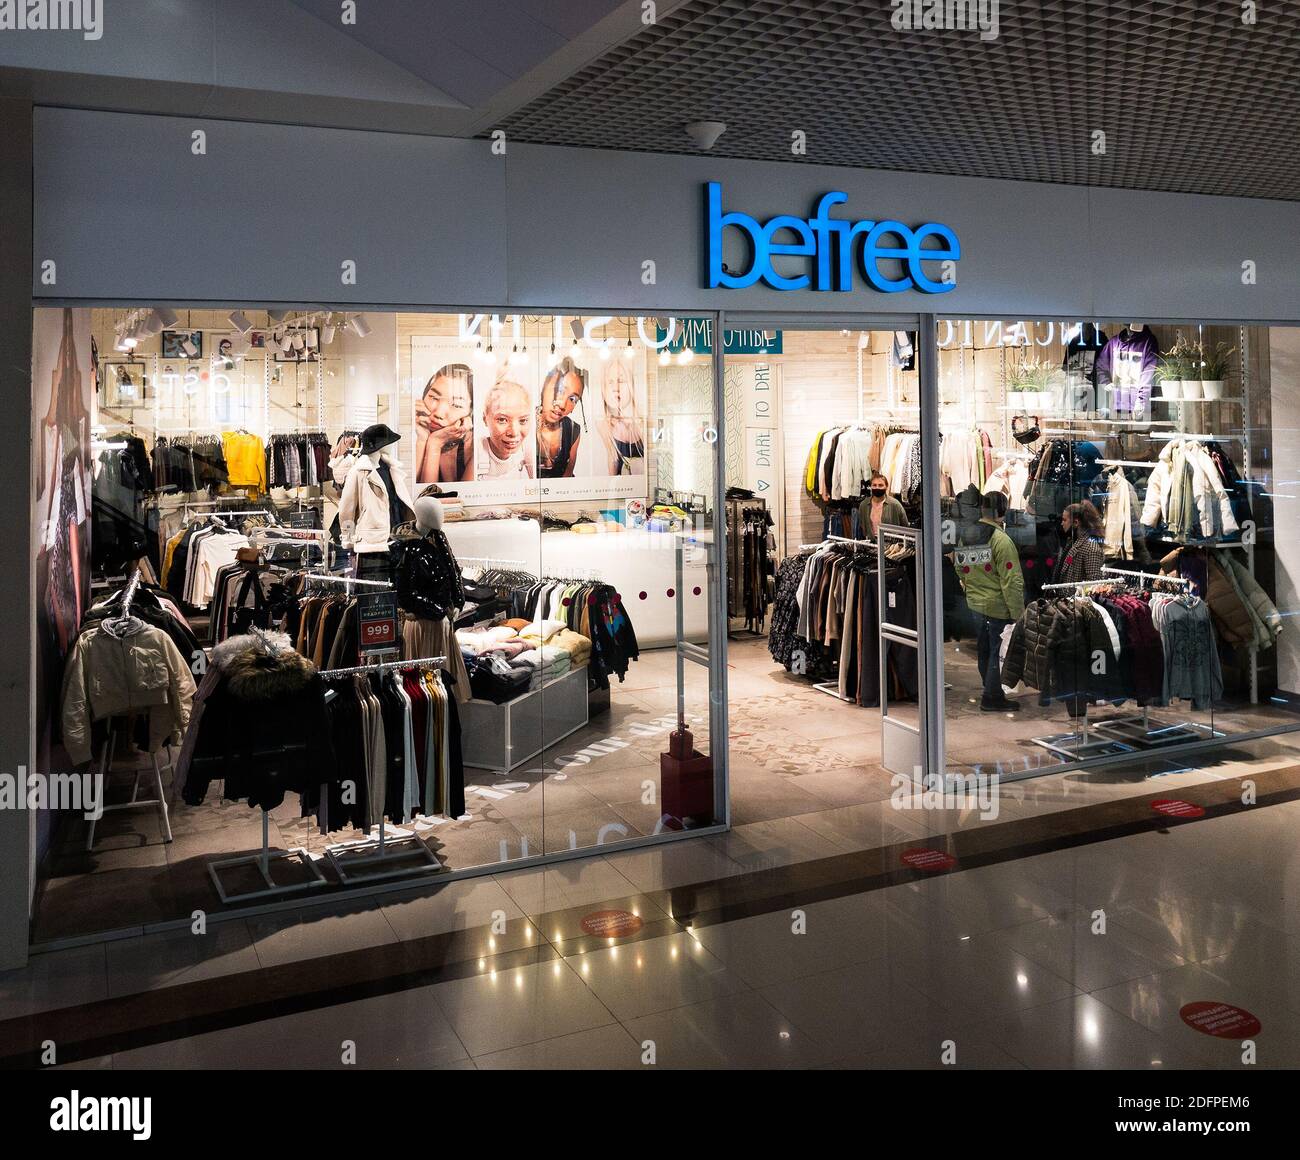 2020: Befree worldwide fashion clothe store opened in a shopping mall Stock  Photo - Alamy